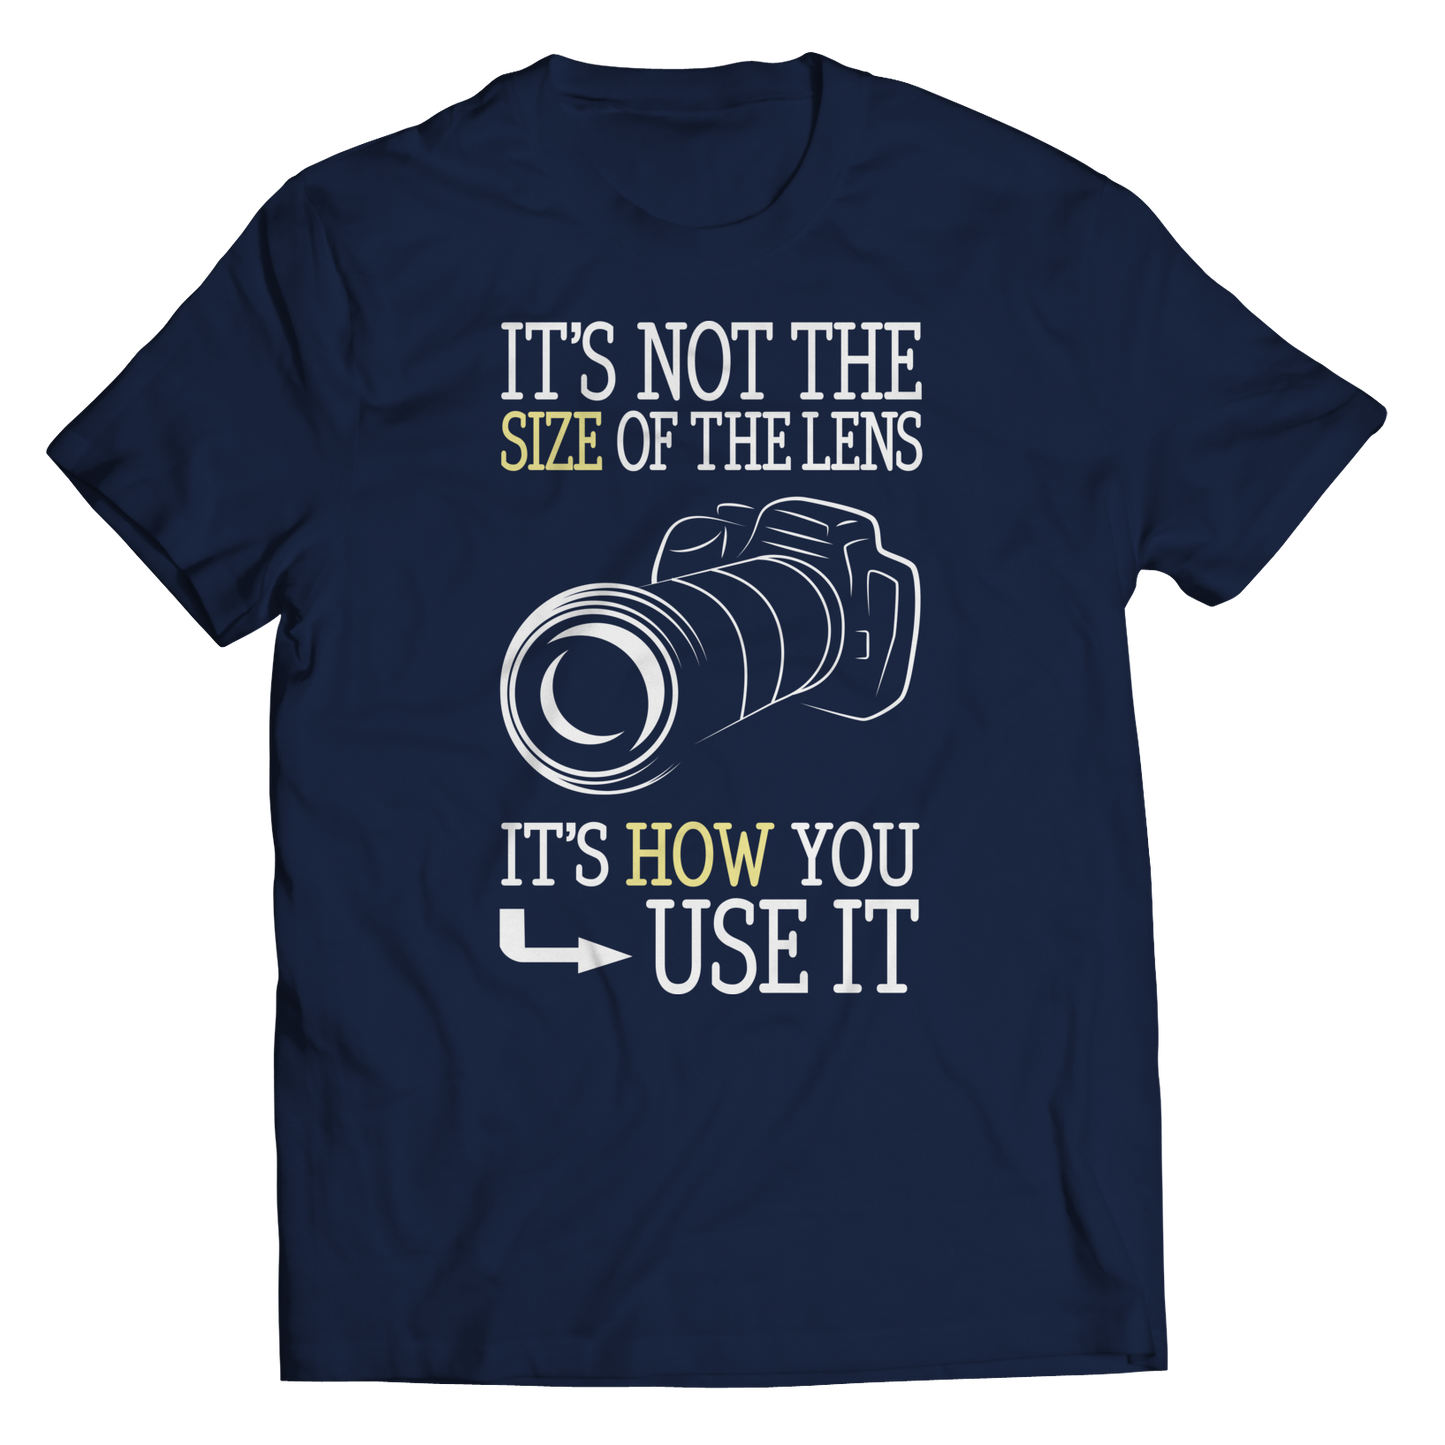 It's Not The Size Of The Lens But How You Use It Shirt